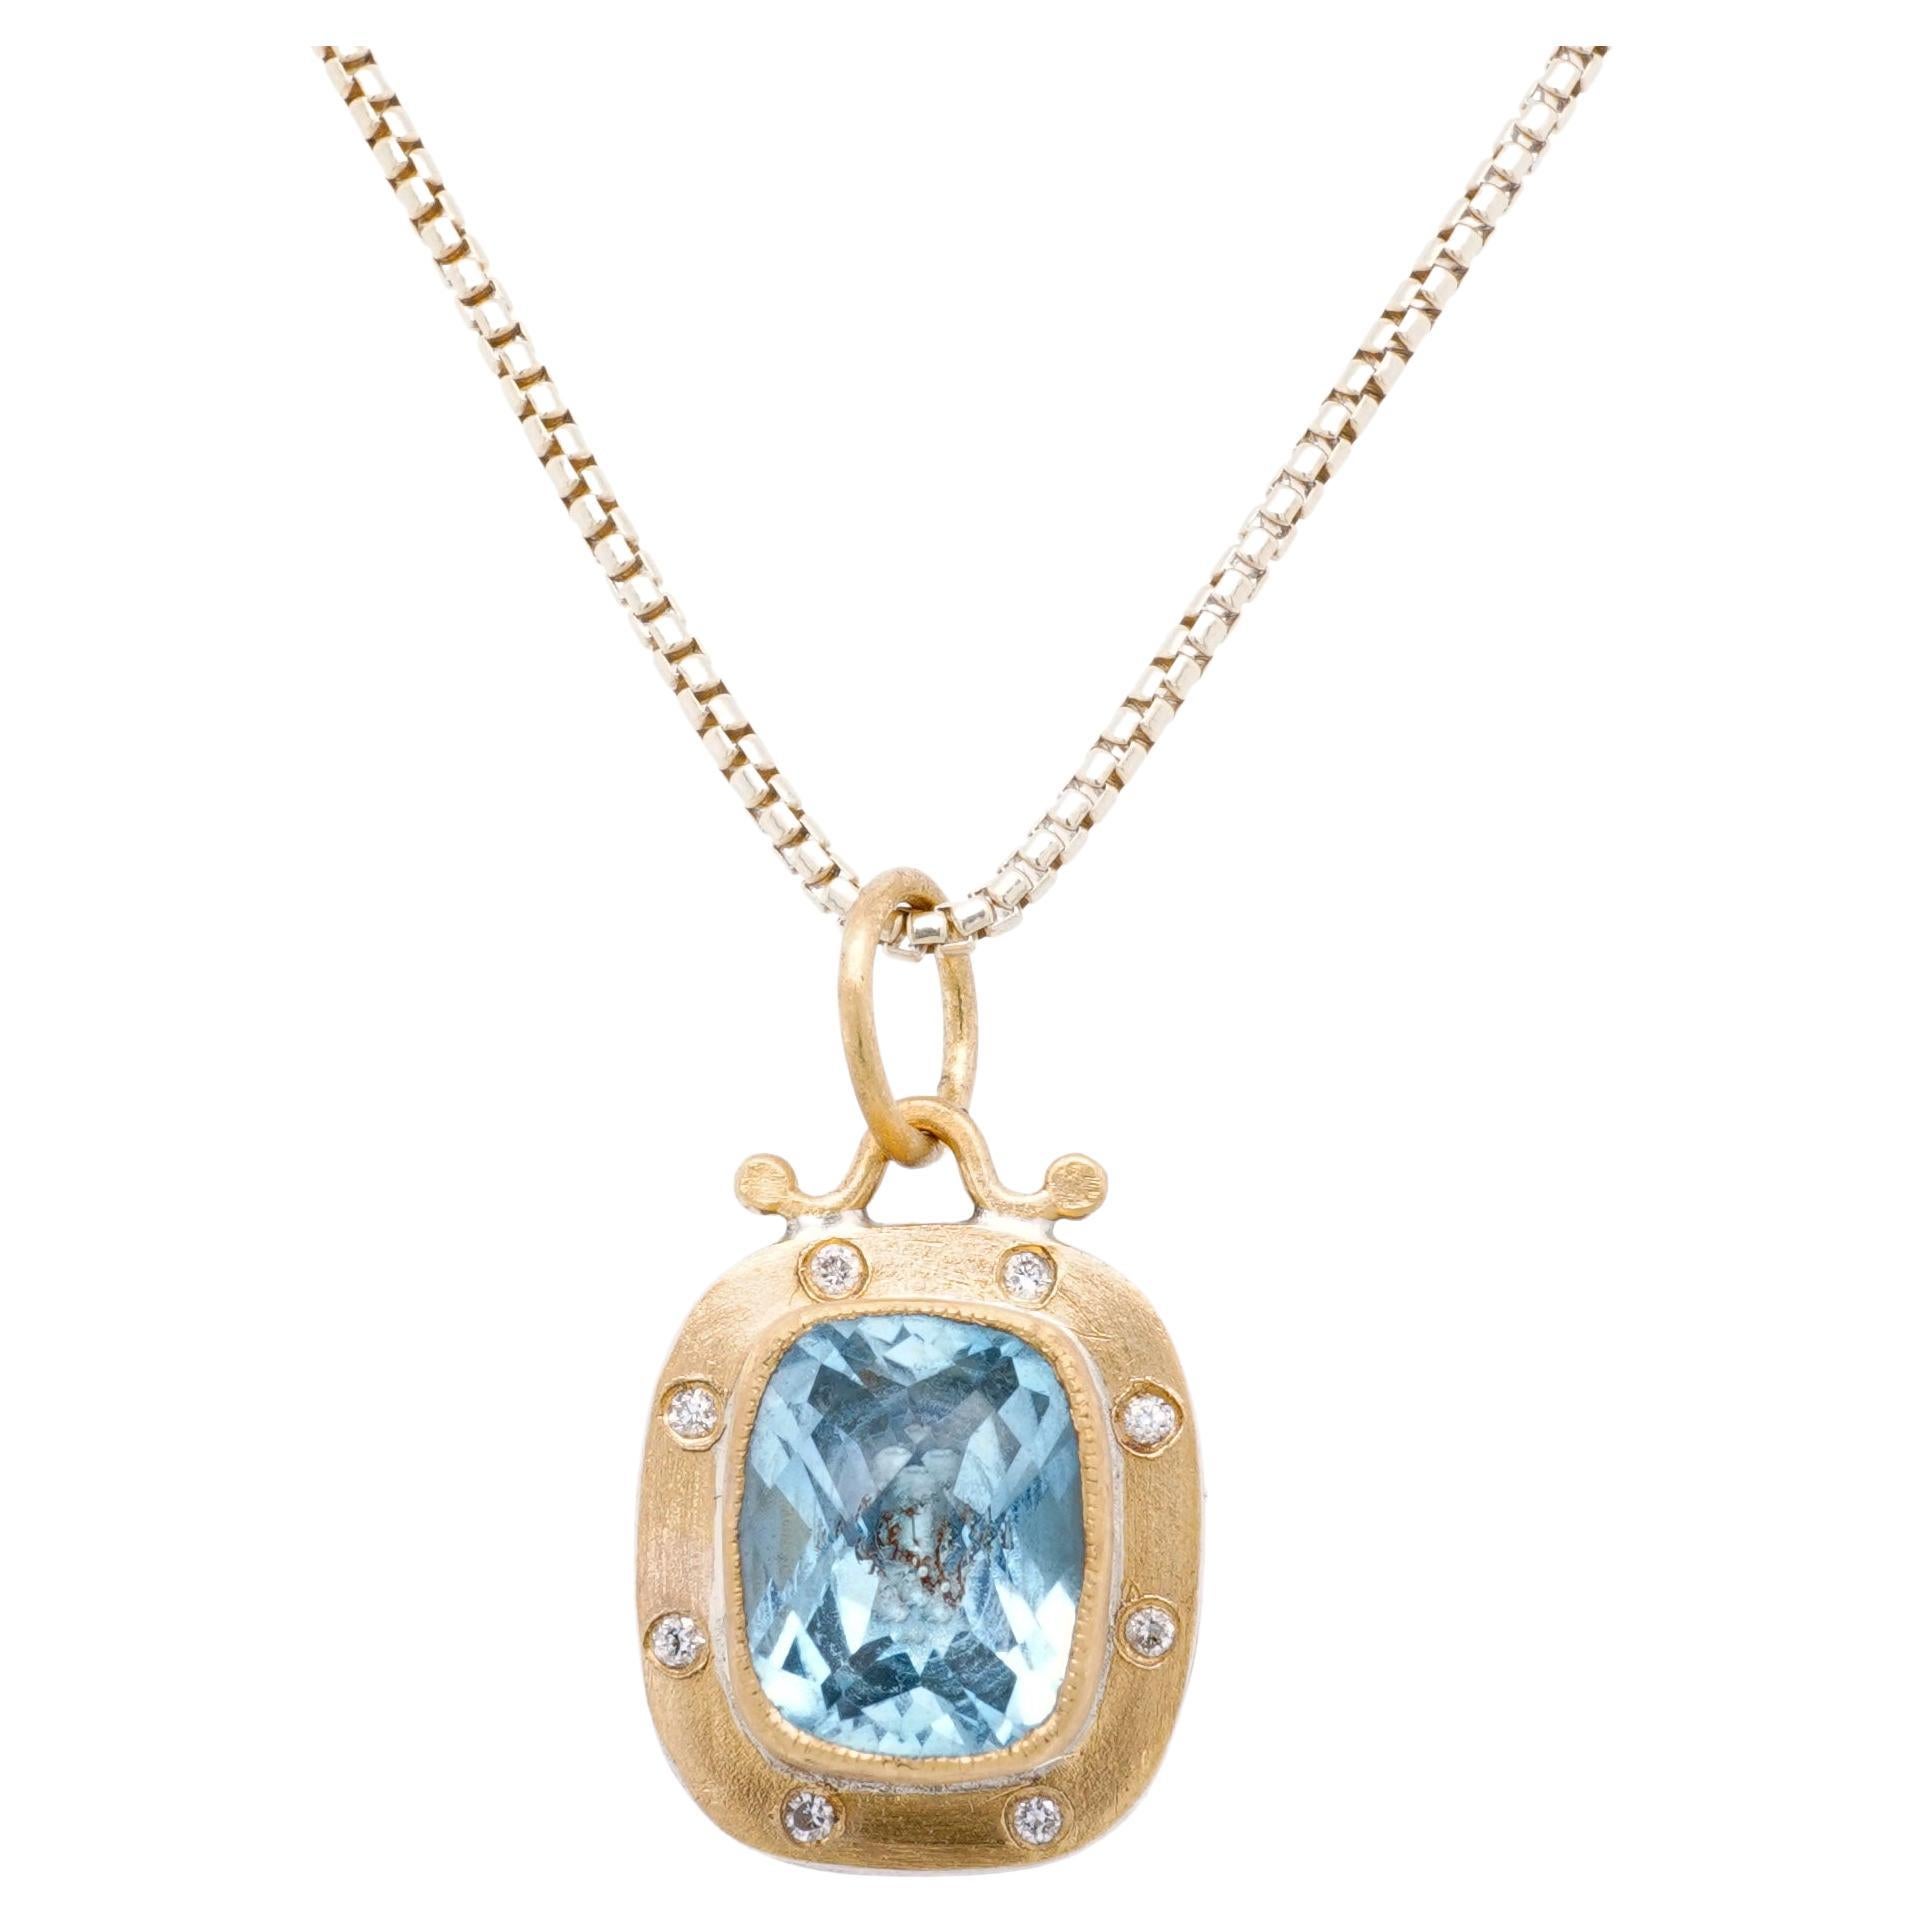 3.65ct Faceted Checkerboard Light Blue Topaz Charm Pendant Necklace with Diamonds, 24kt Gold and Silver by Prehistoric Works of Istanbul, Turkey. Light Blue Topaz - 3.65cts, Diamonds - 0.08cts. This stunning topaz is framed in 24kt gold with 8